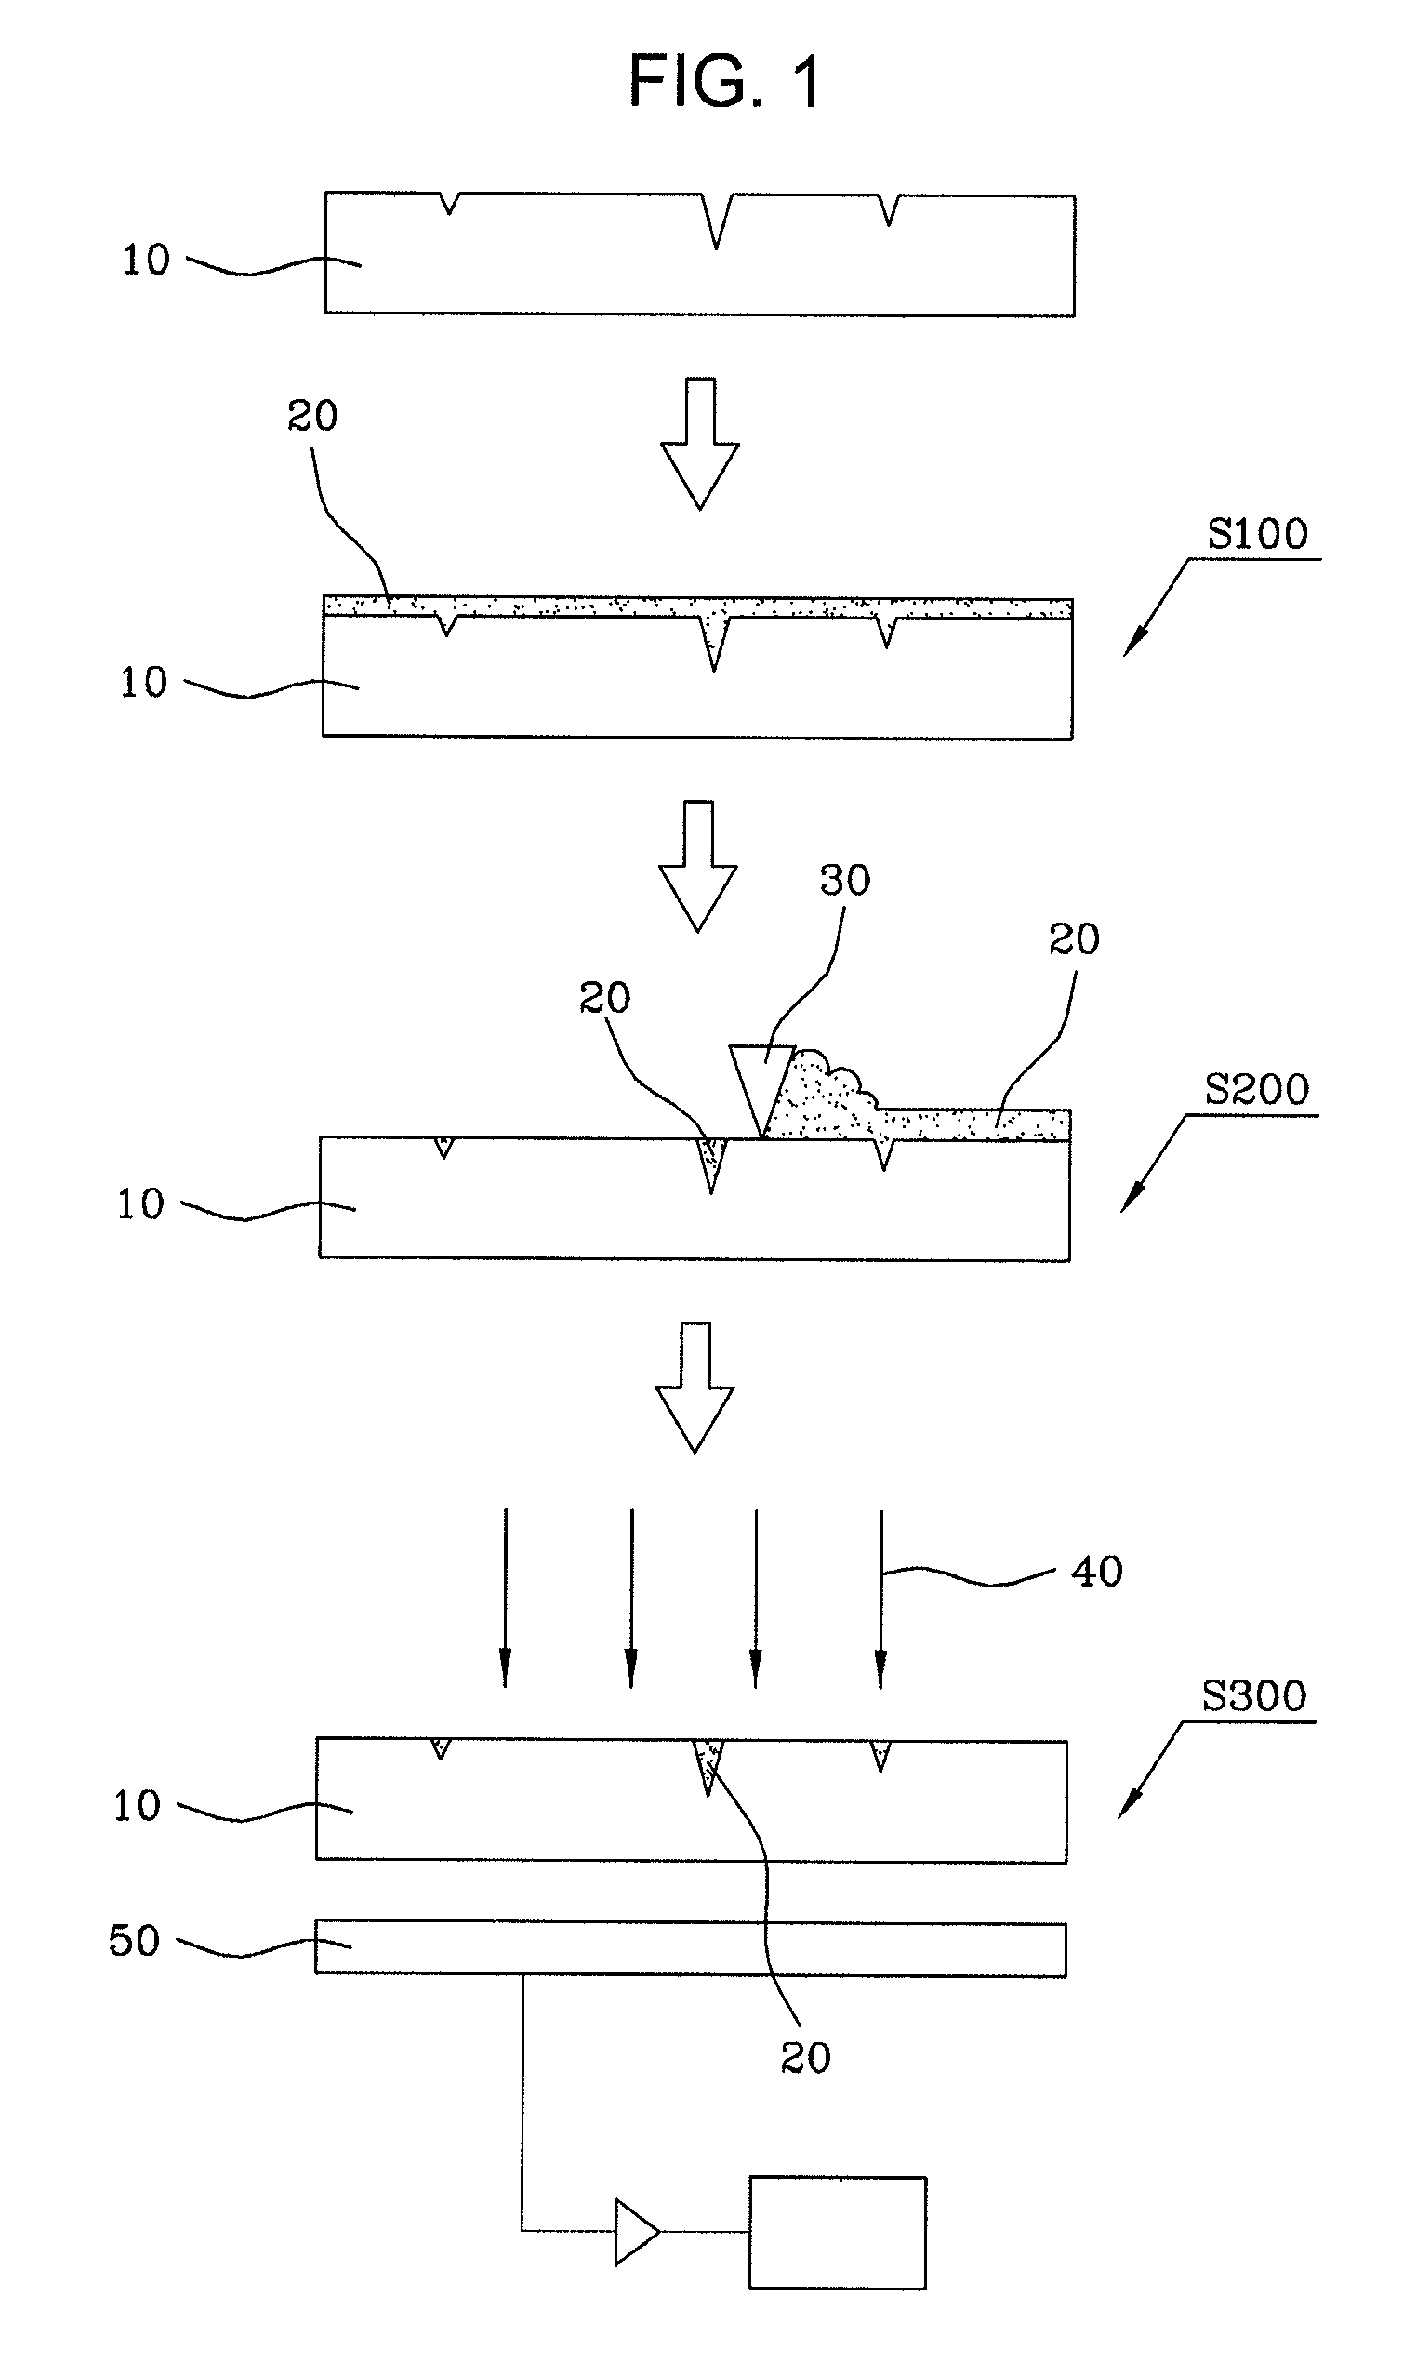 Method of detecting fine surface defects